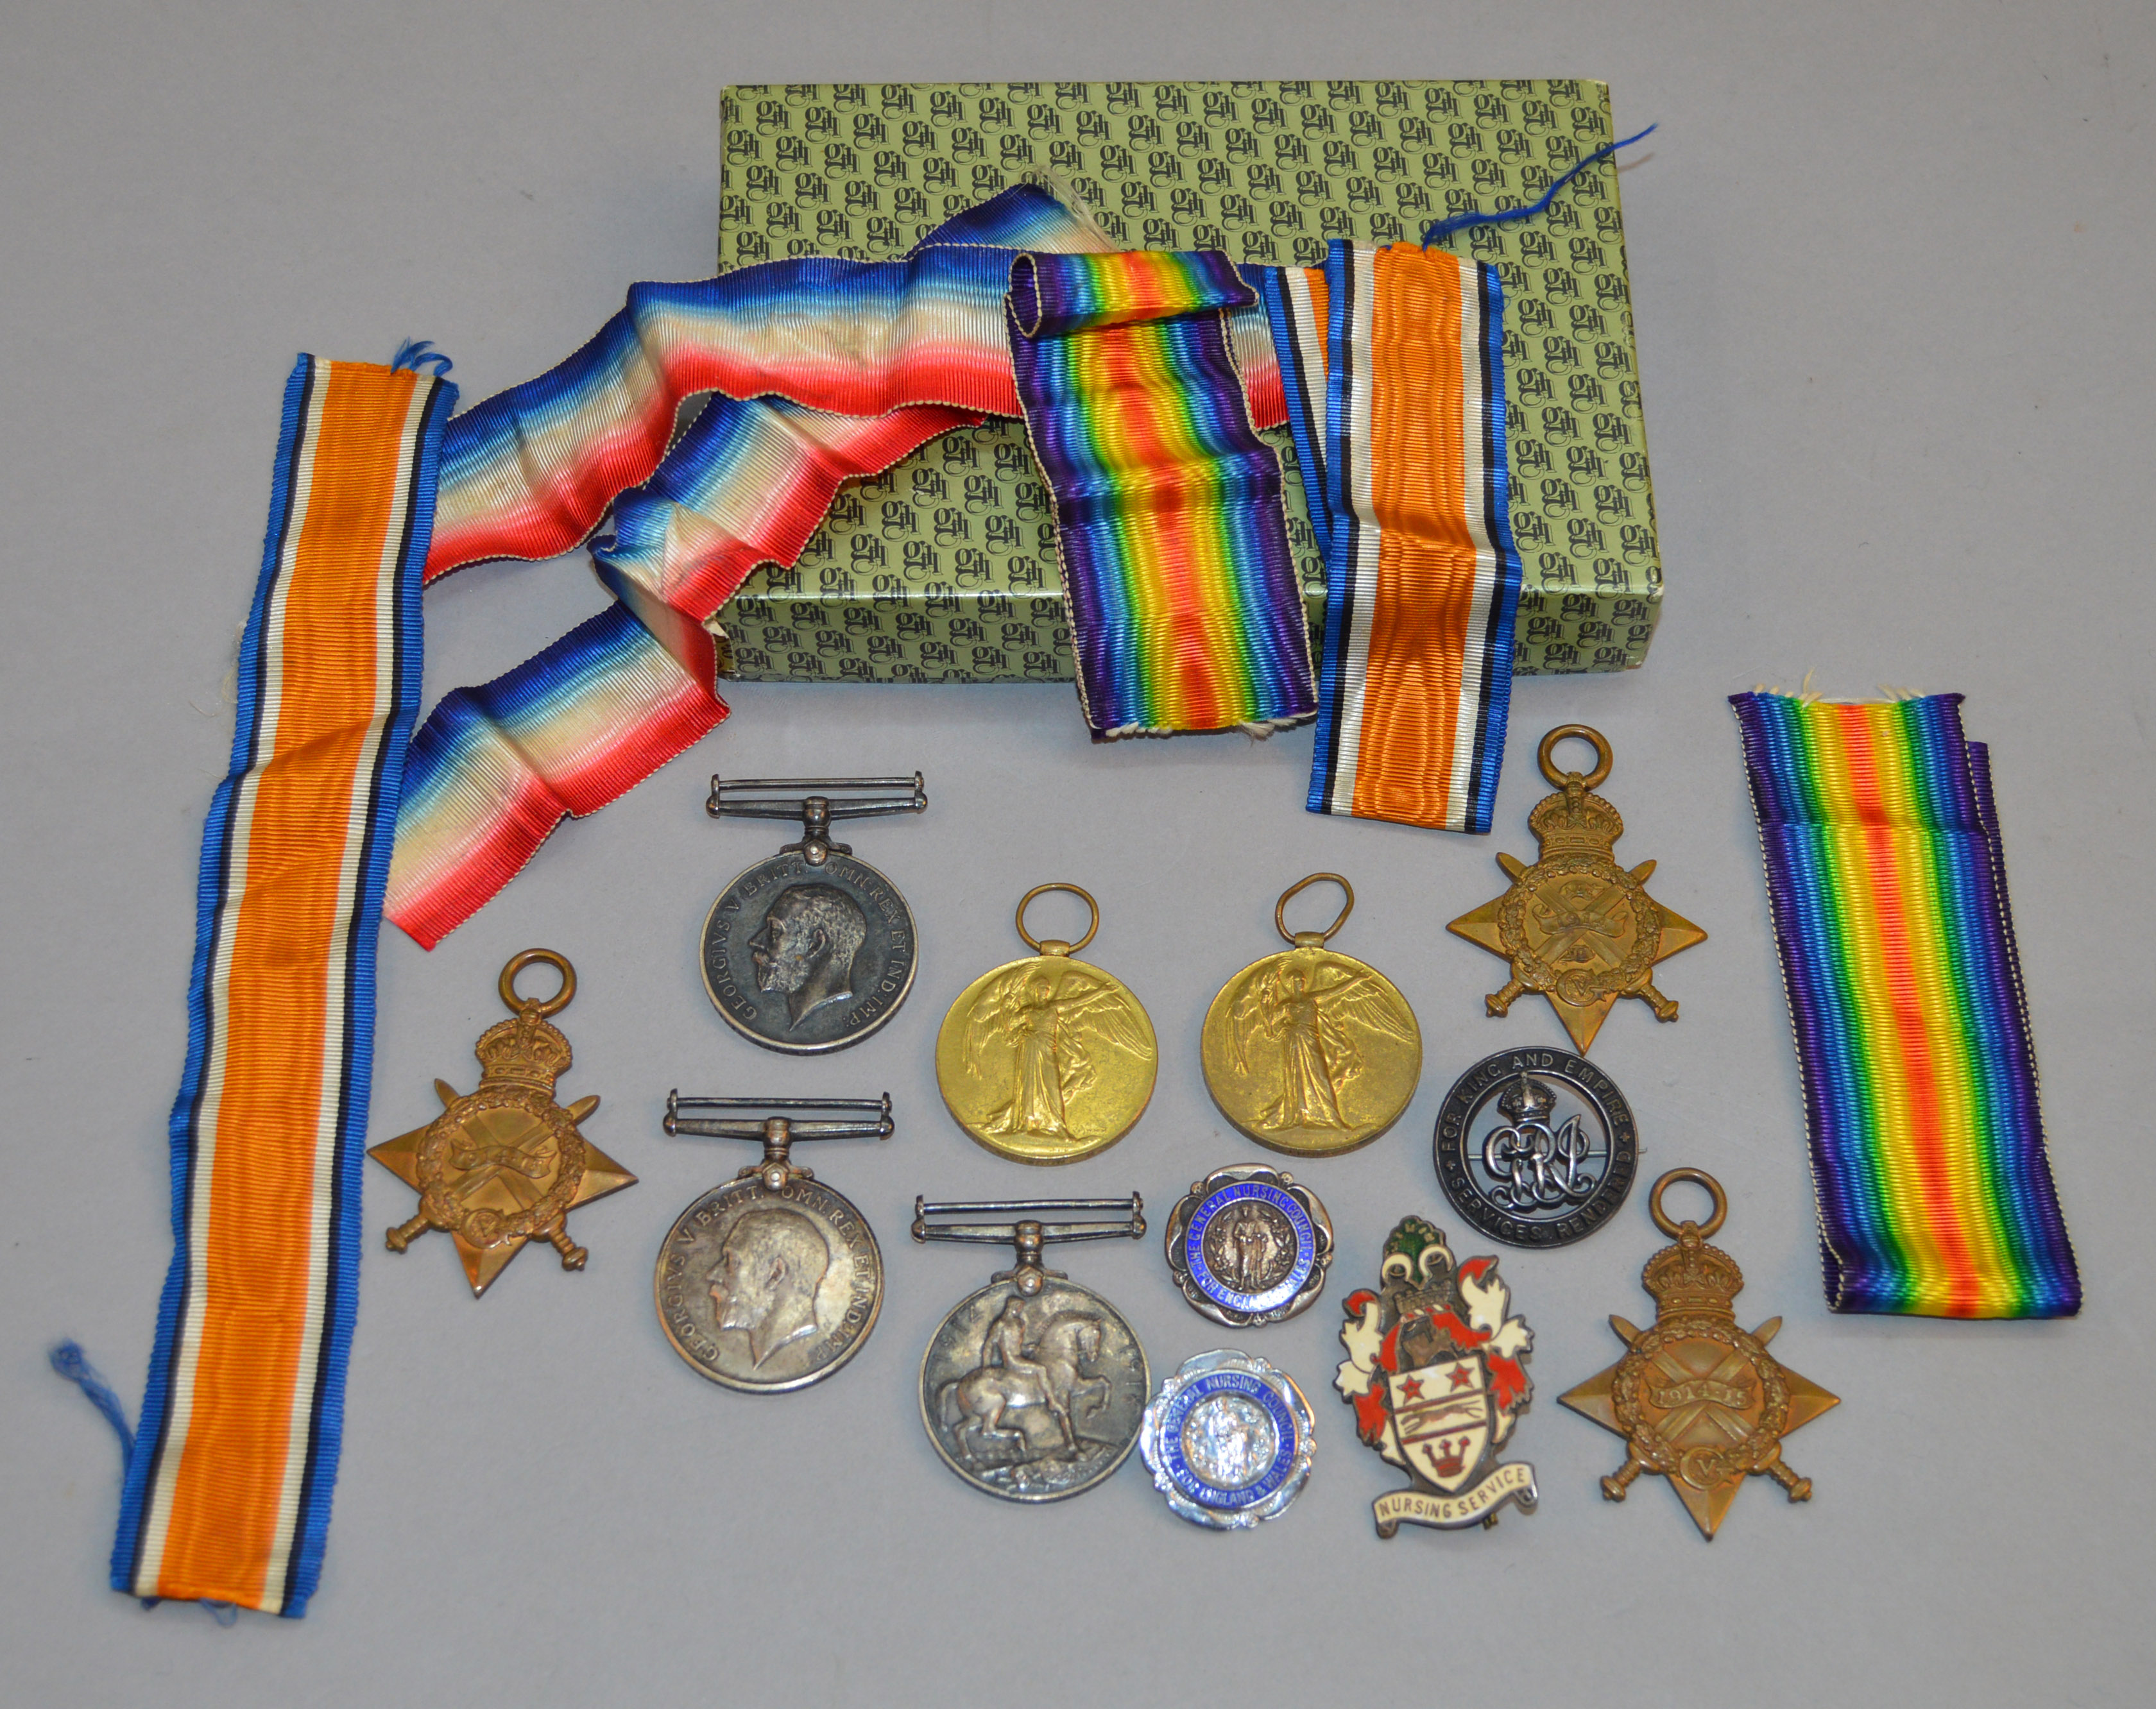 Two WW1 medal groups to brothers:. A 1914 trio to "L. Cpl. W. Thomson 11446 K. O.